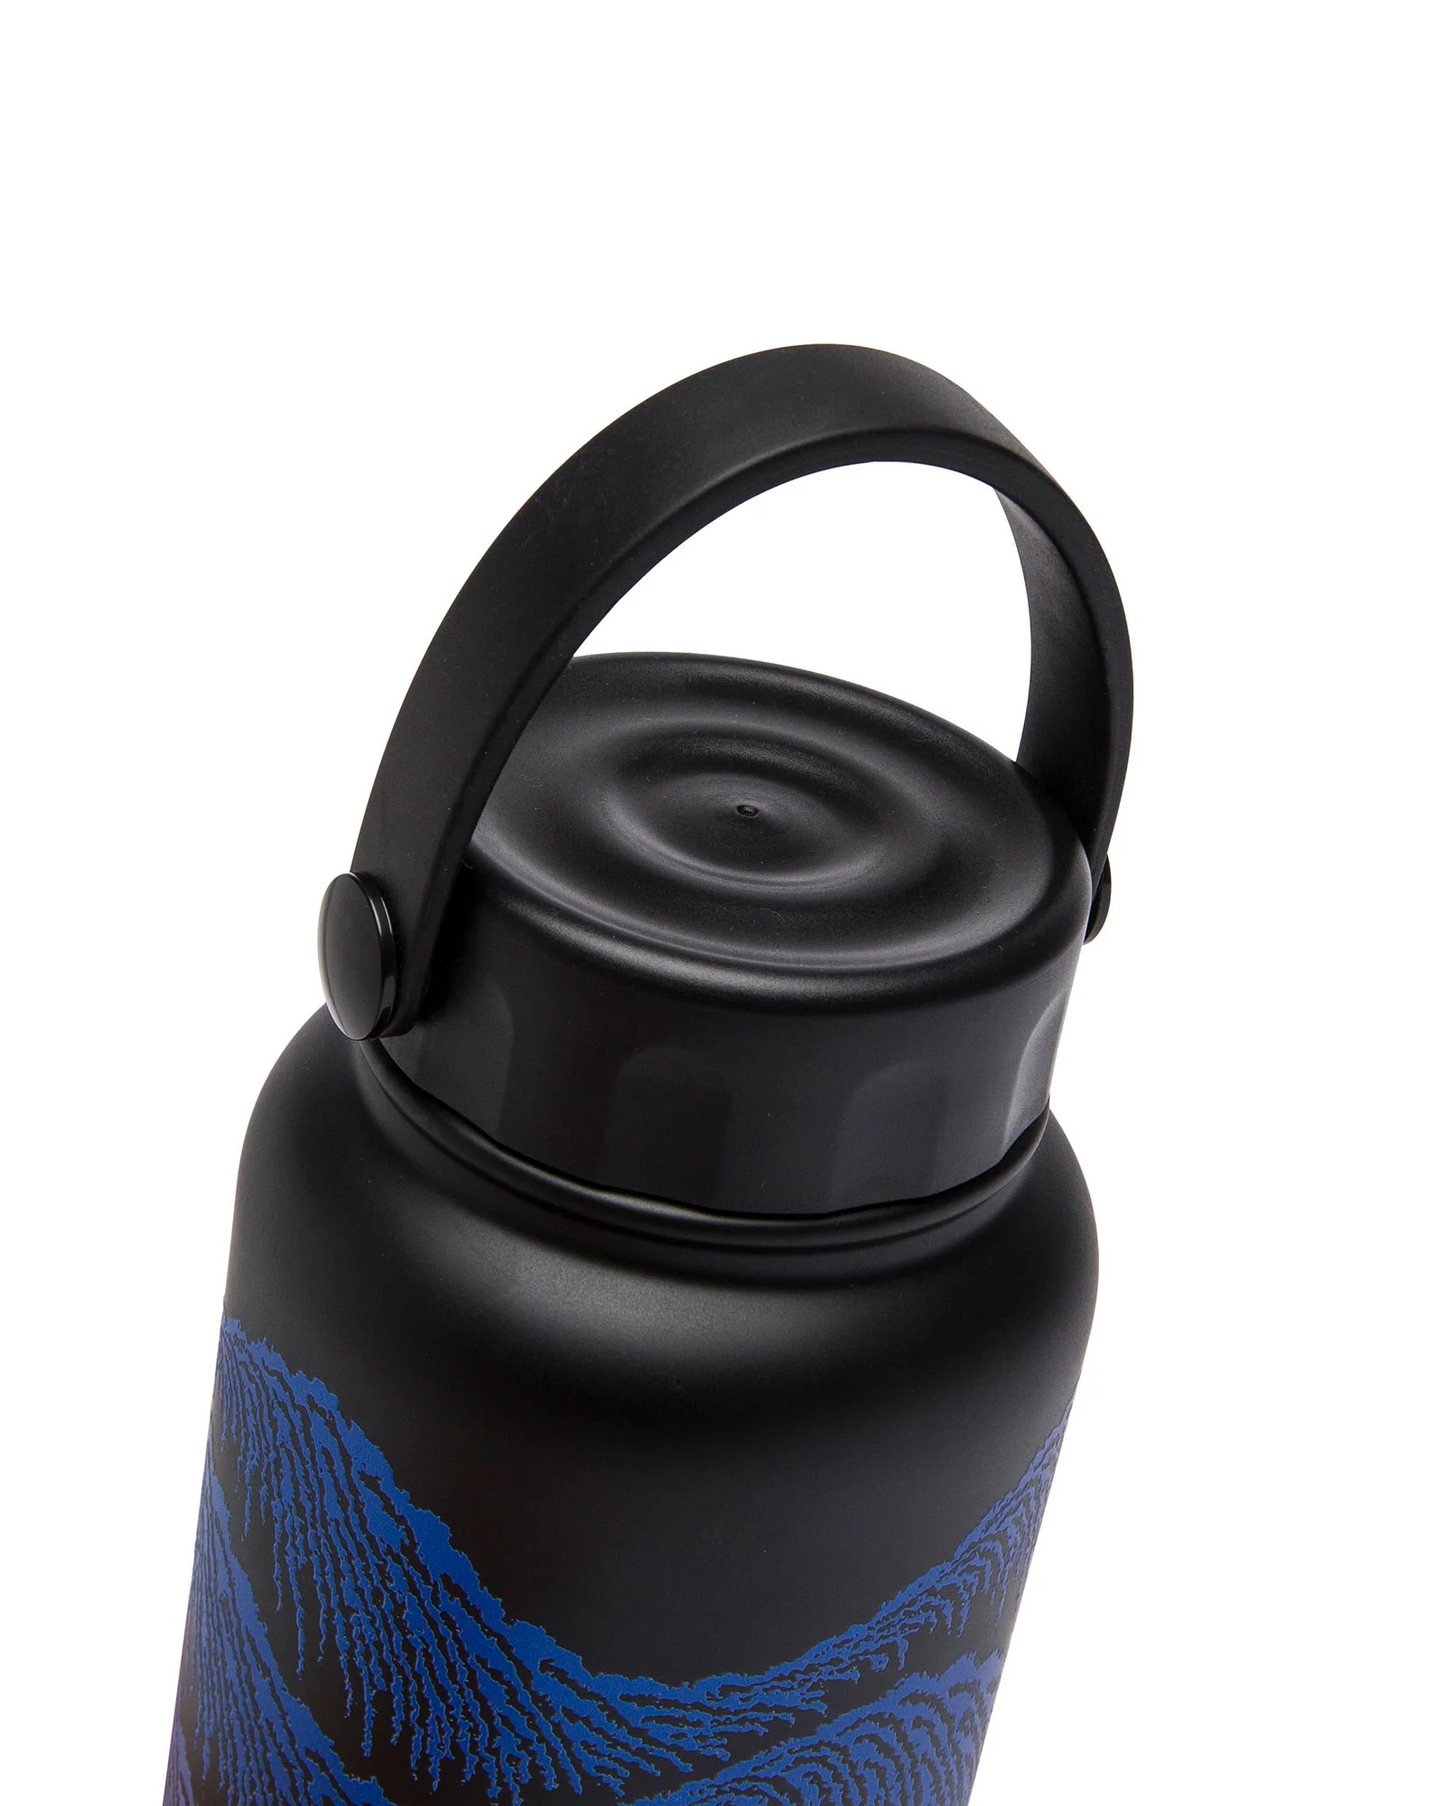 Parks Project Acadia Waves 32oz Insulated Water Bottle